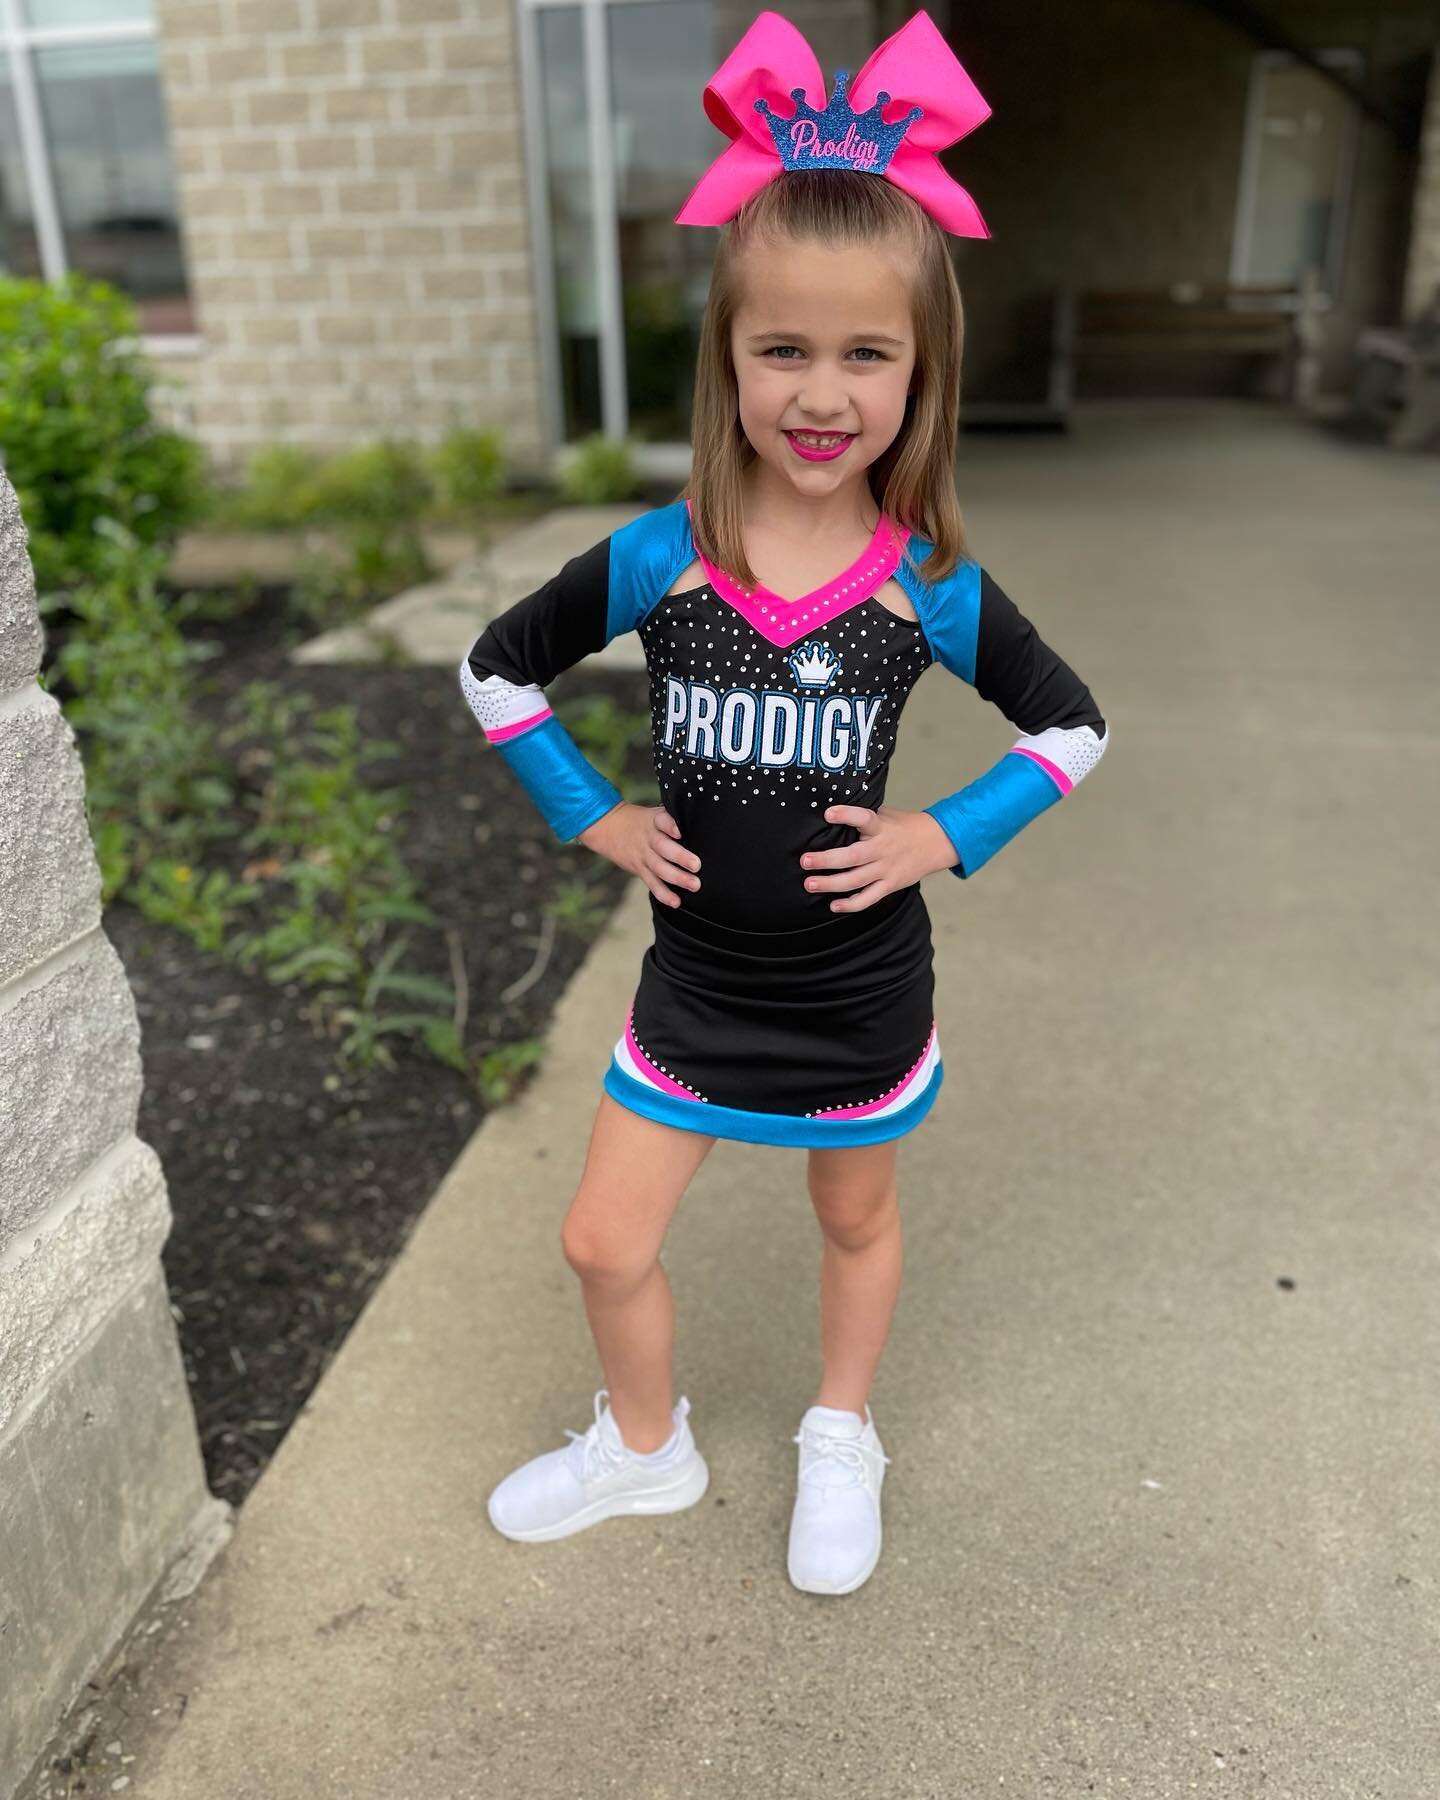 Victory Lee Moore got her Prodigy Cheer Athletics pics the other day and her team was invited to walk in the parade in Dillsboro, Indiana today. GO VICTORY! #Victory #victoryleemoore #cheer #cheerleading ⭐️⭐️⭐️⭐️⭐️